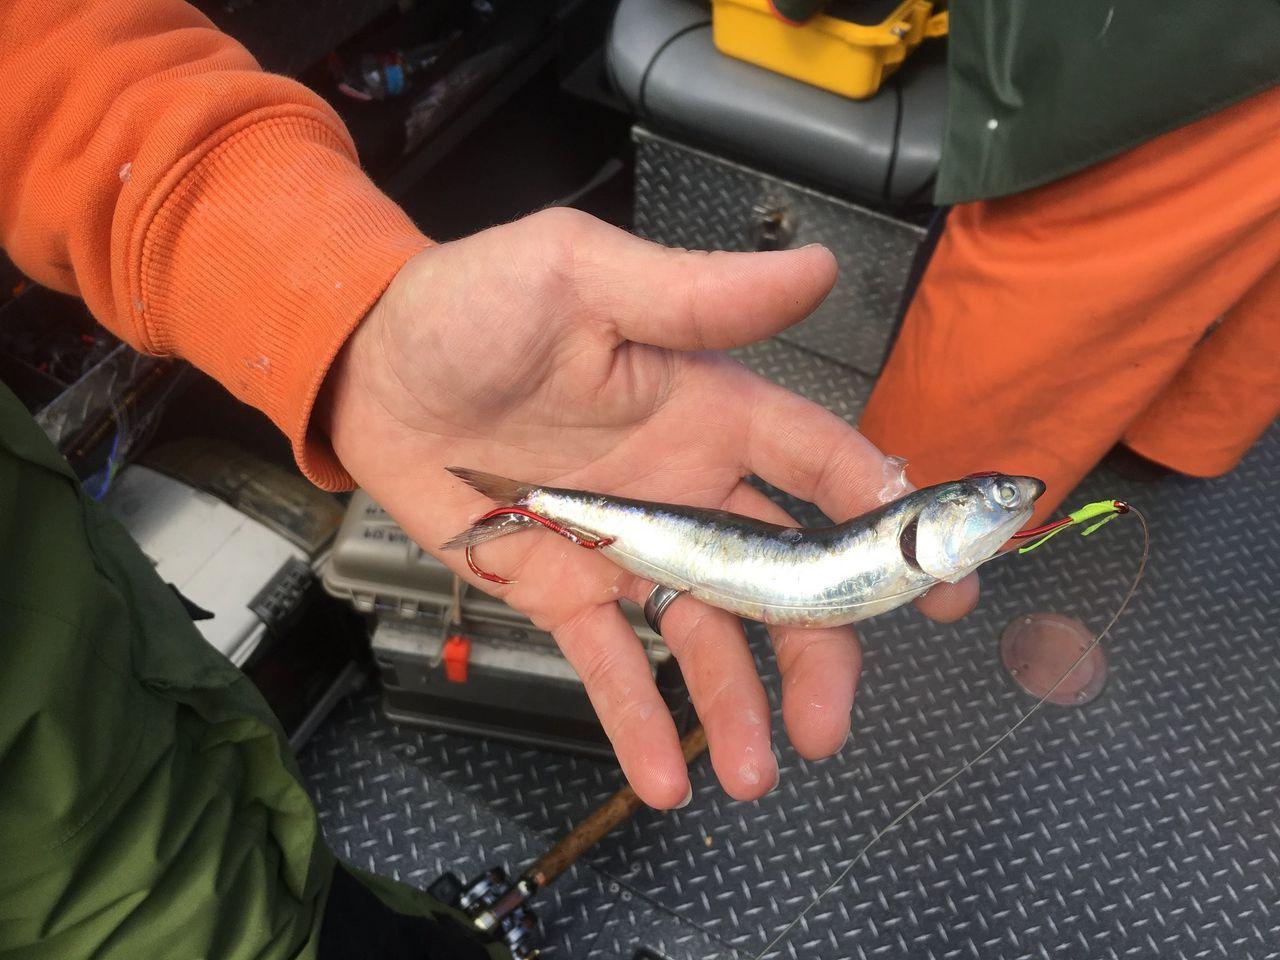 Surefire method for catching salmon requires anchovy, toothpick -  oregonlive.com